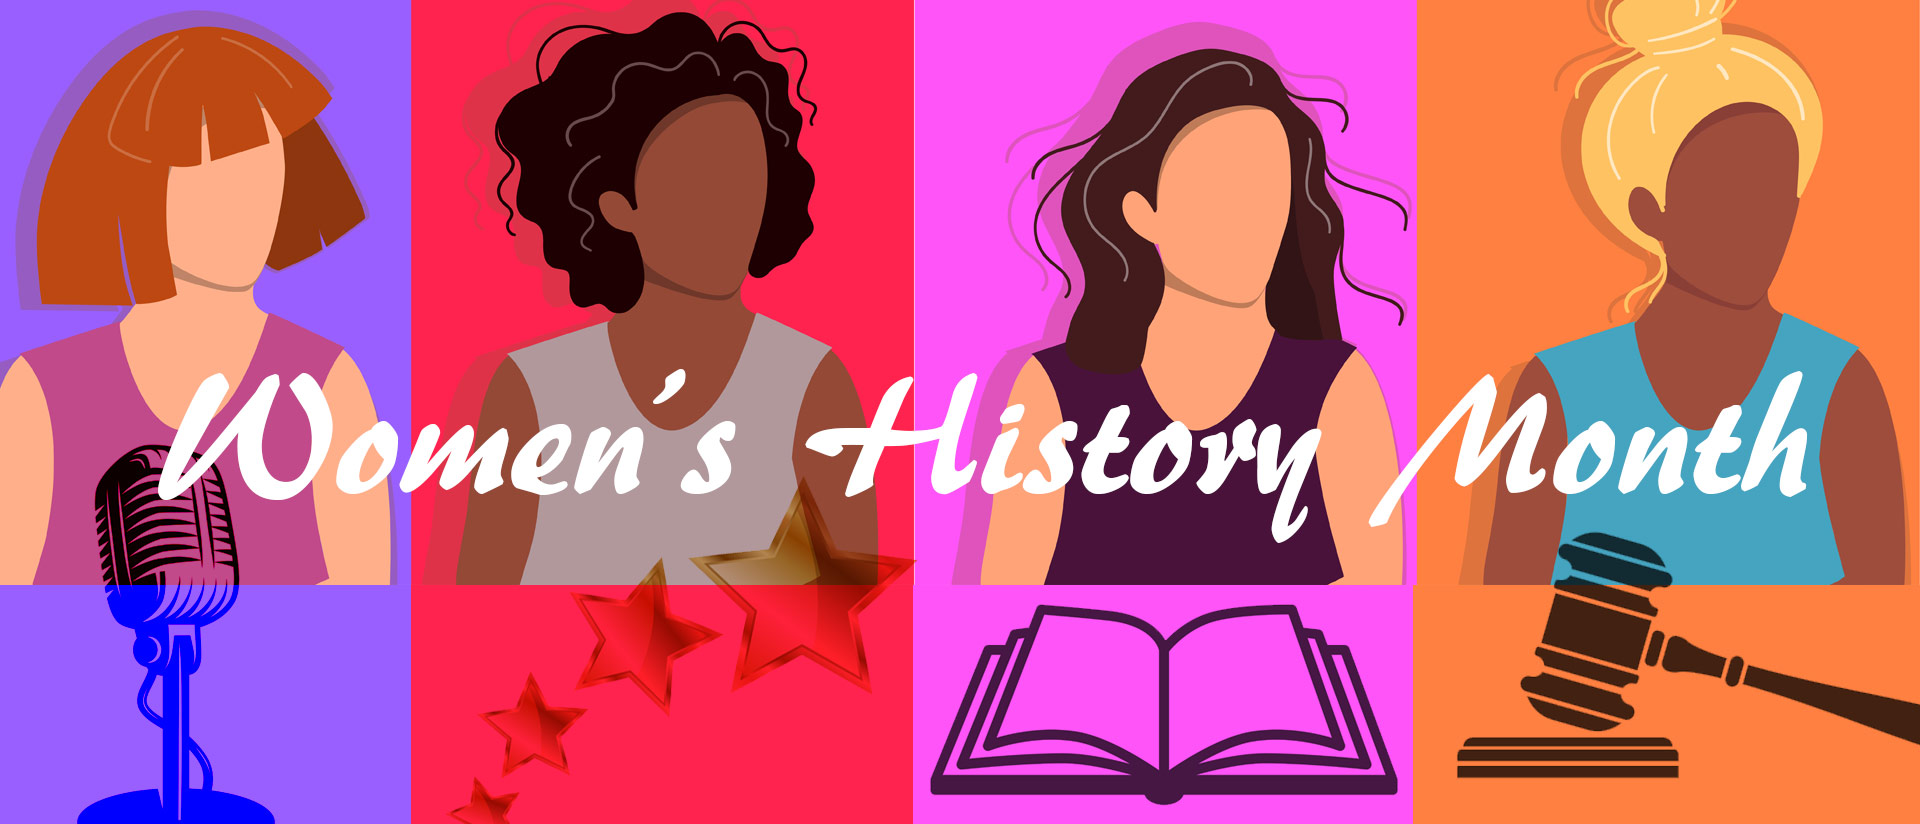 clipart of diverse women for Women's History Month